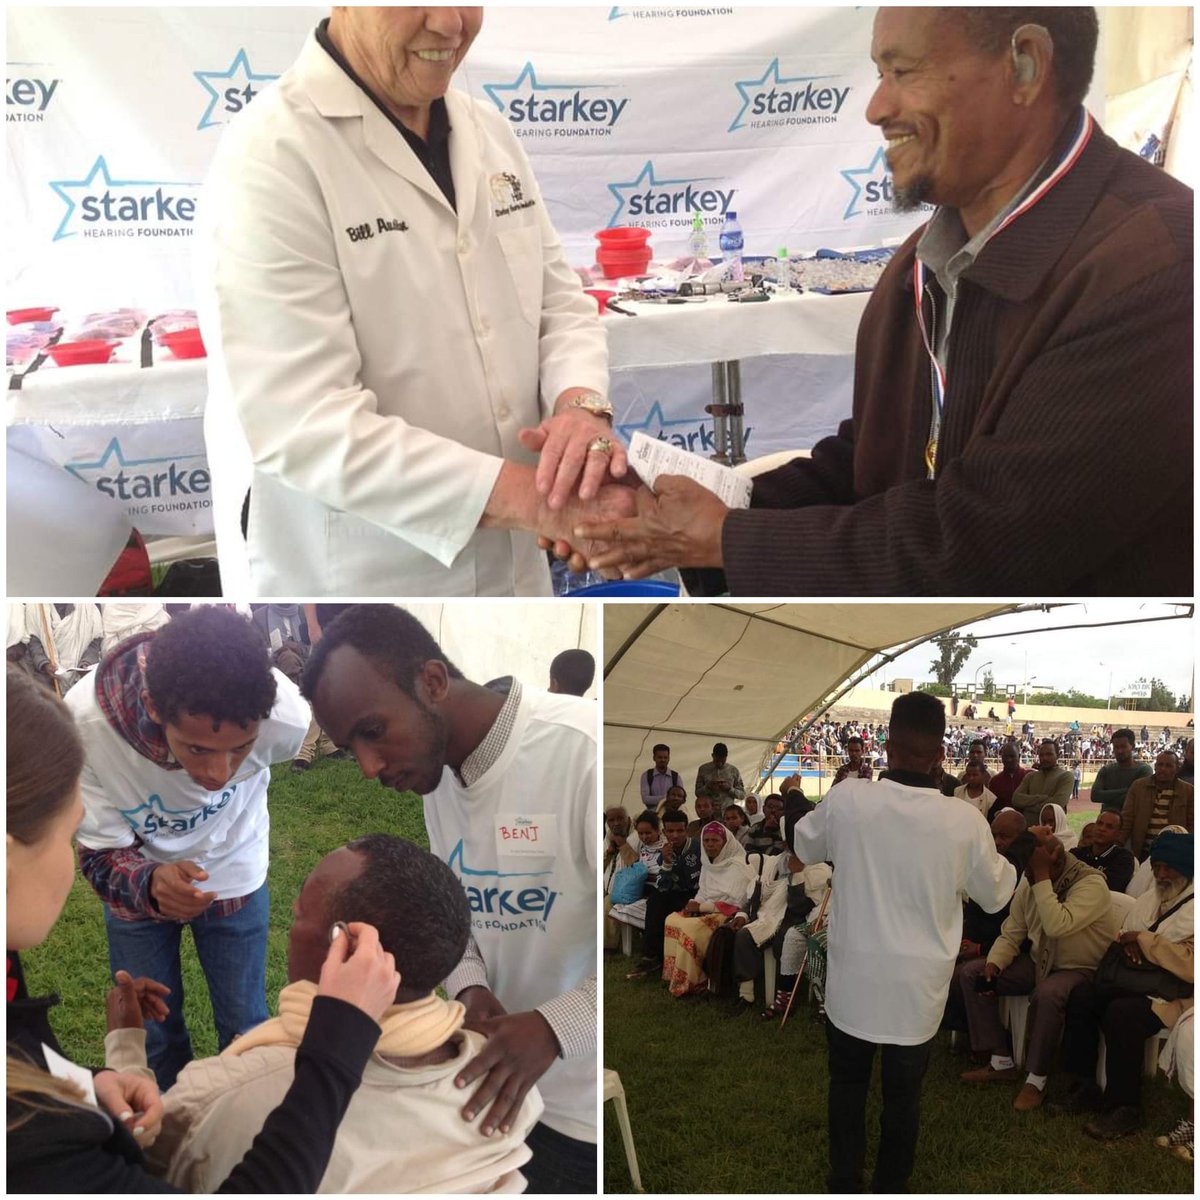 In #Tigray,> 5k people with hearing problems were benefited from @starkeyhearing before the war. Due to the war, follow-up services were stopped.On this world hearing day, we express our gratitude to Starkey & we're optimistic you will resume the services.
#WorldHearingDay 
@WHO